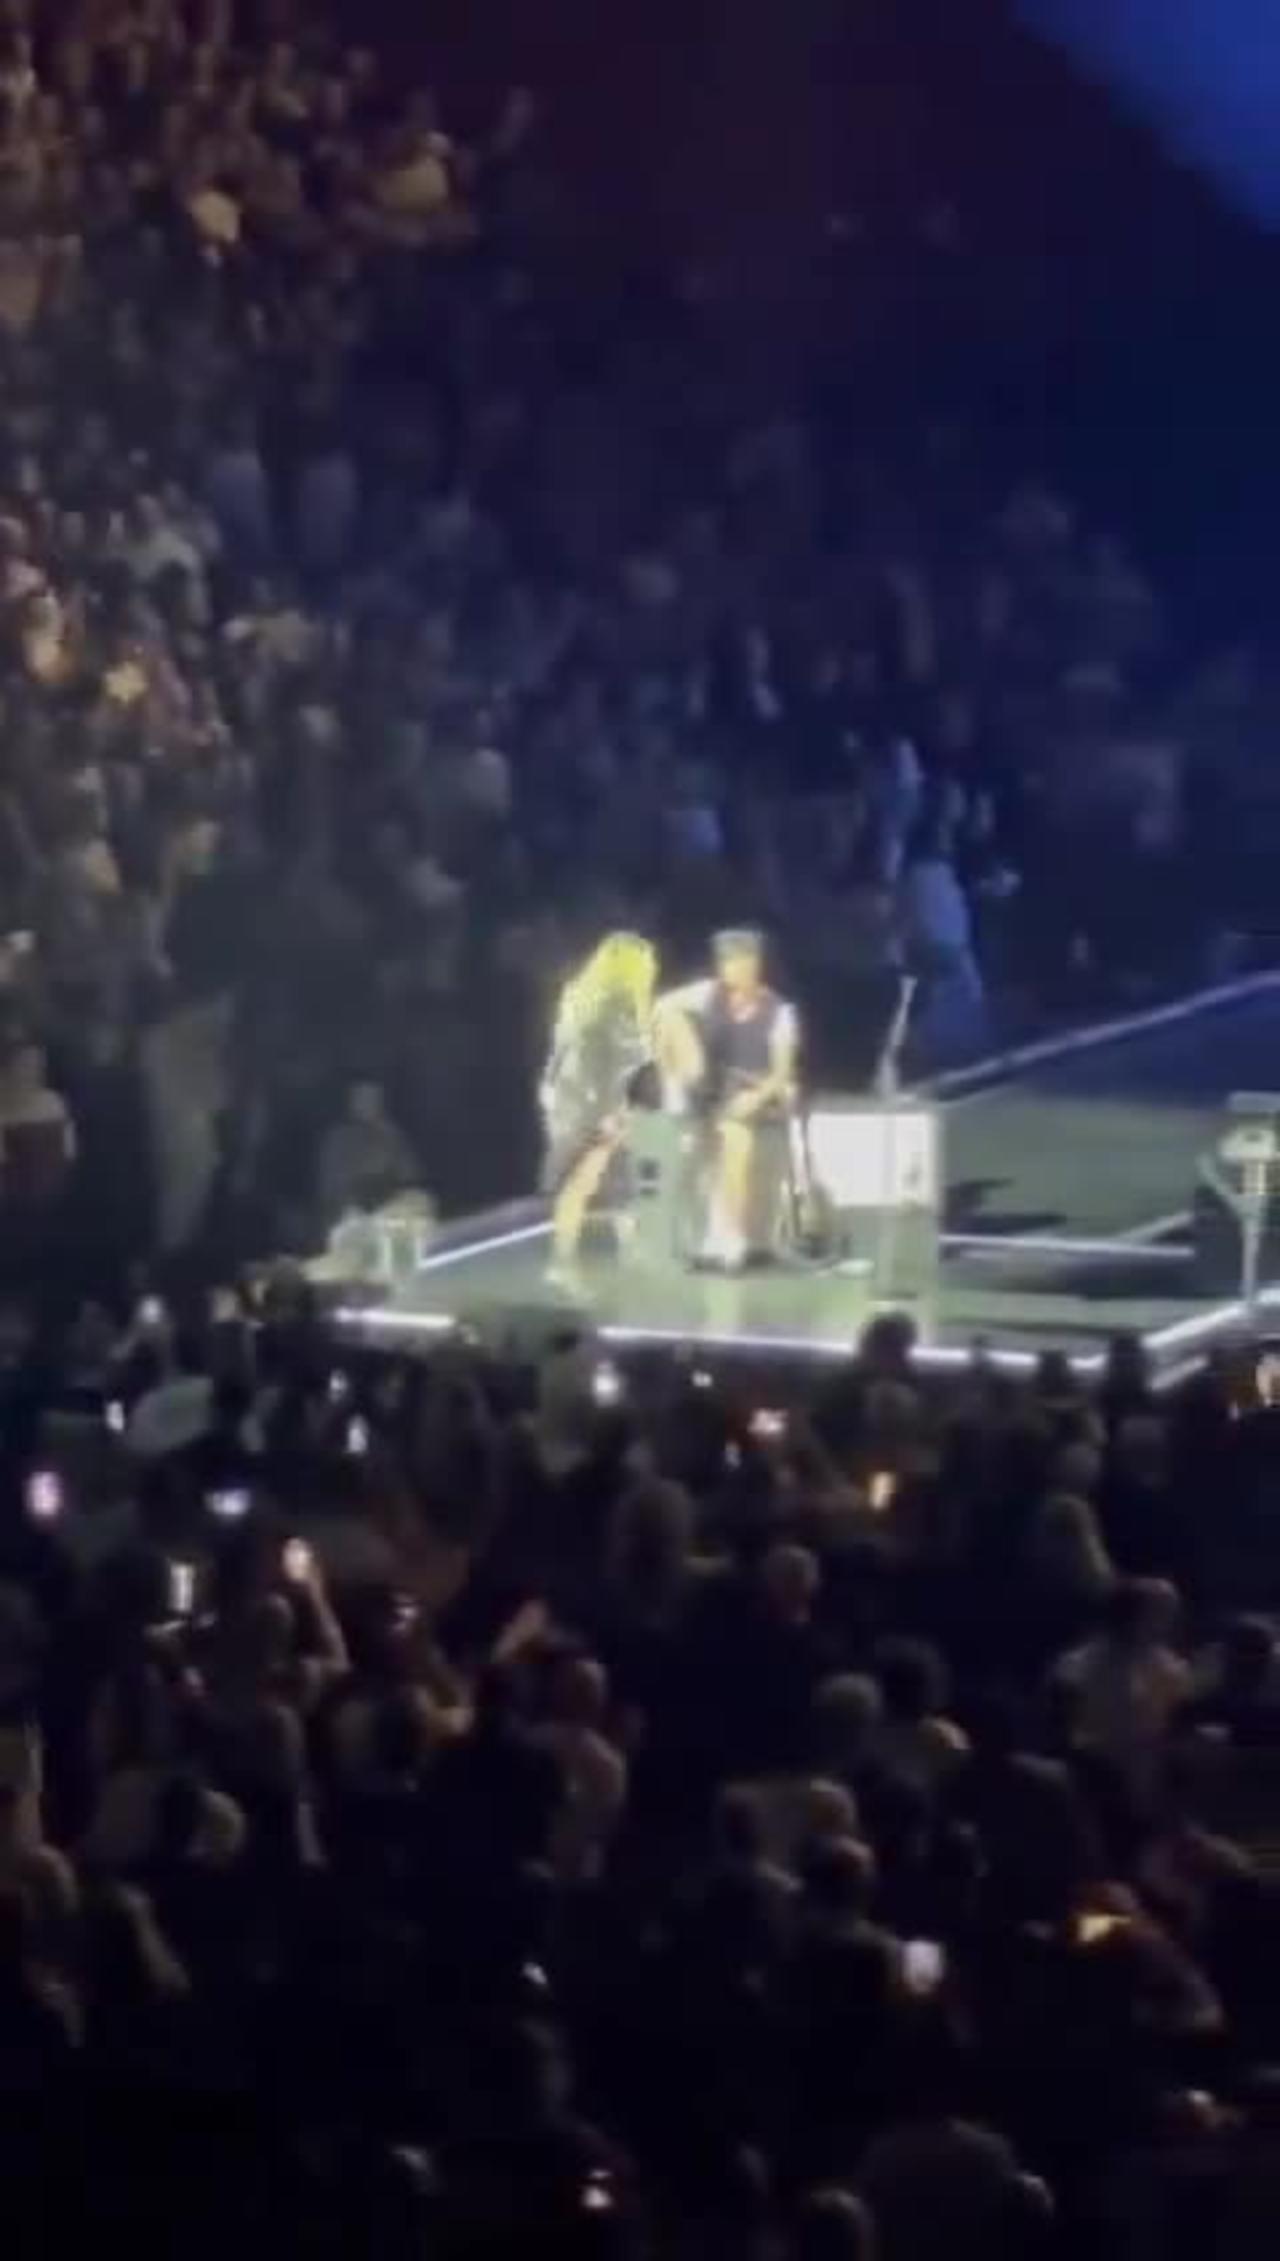 Madonna Calls Out Wheelchair-Bound Fan For Sitting Down During Concert: 'Sorry About That'